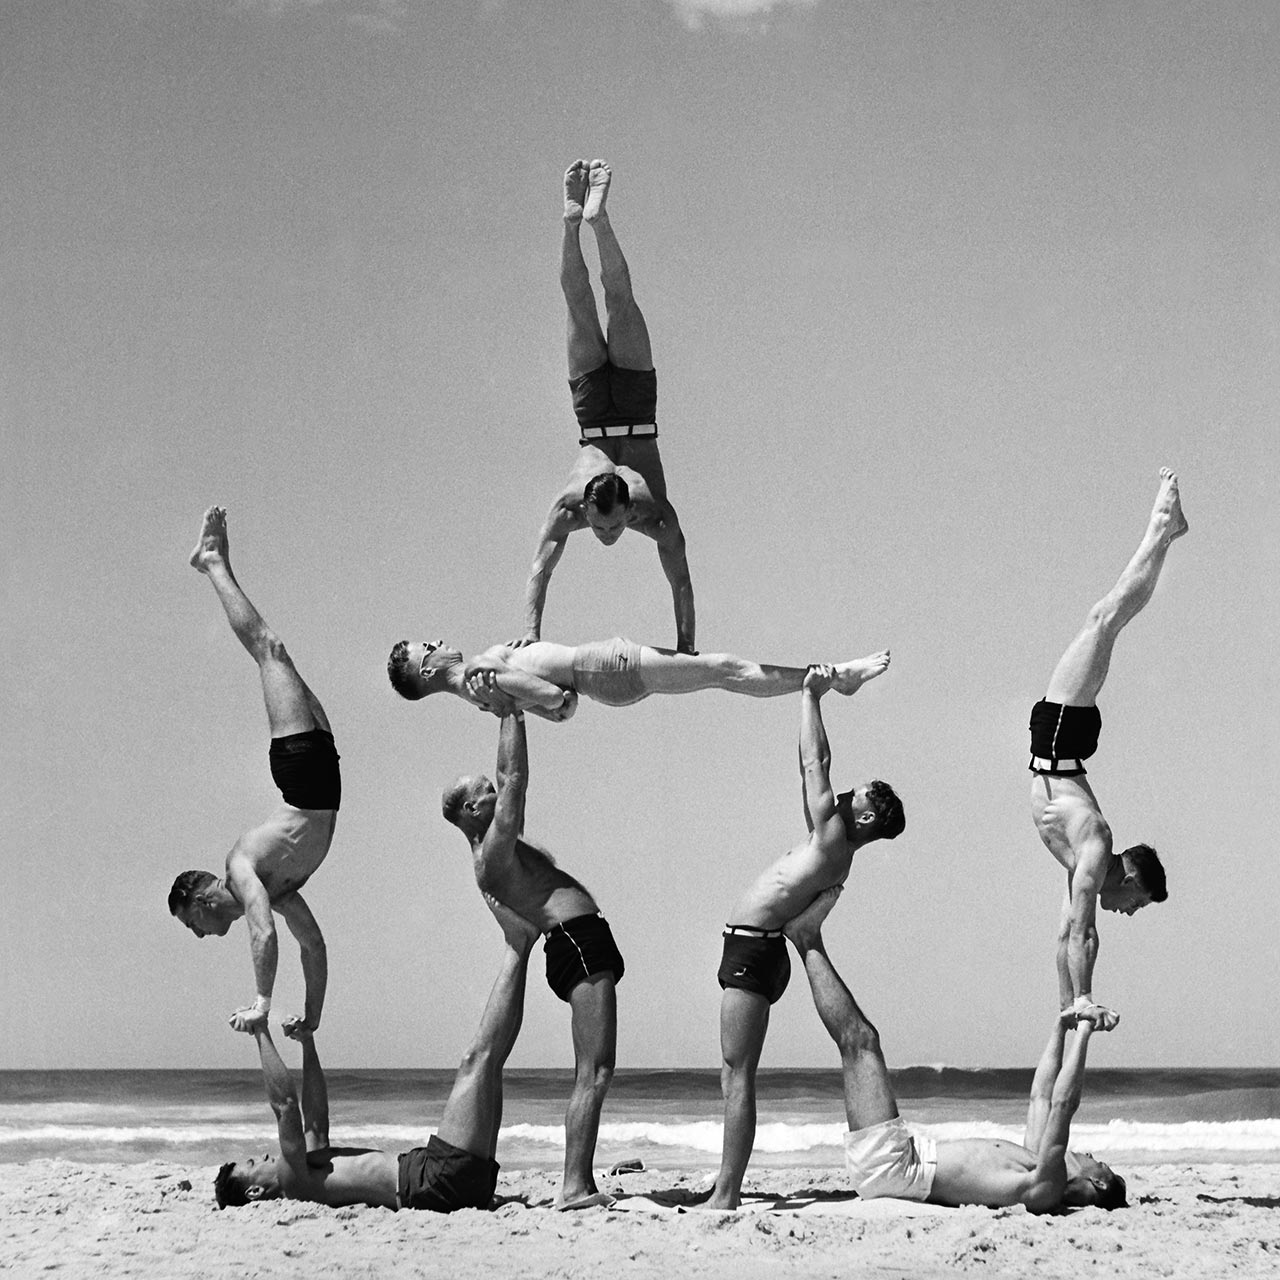 Max Stewart handstands atop Frank Cottier, held up by Alf Stanbrough and Vic Whitehead, while Jack Goldberg and Charlie Lusty handstand off Tim Holman and Ken Cumming, 8 October 1939. (Digital ID: a2391032)